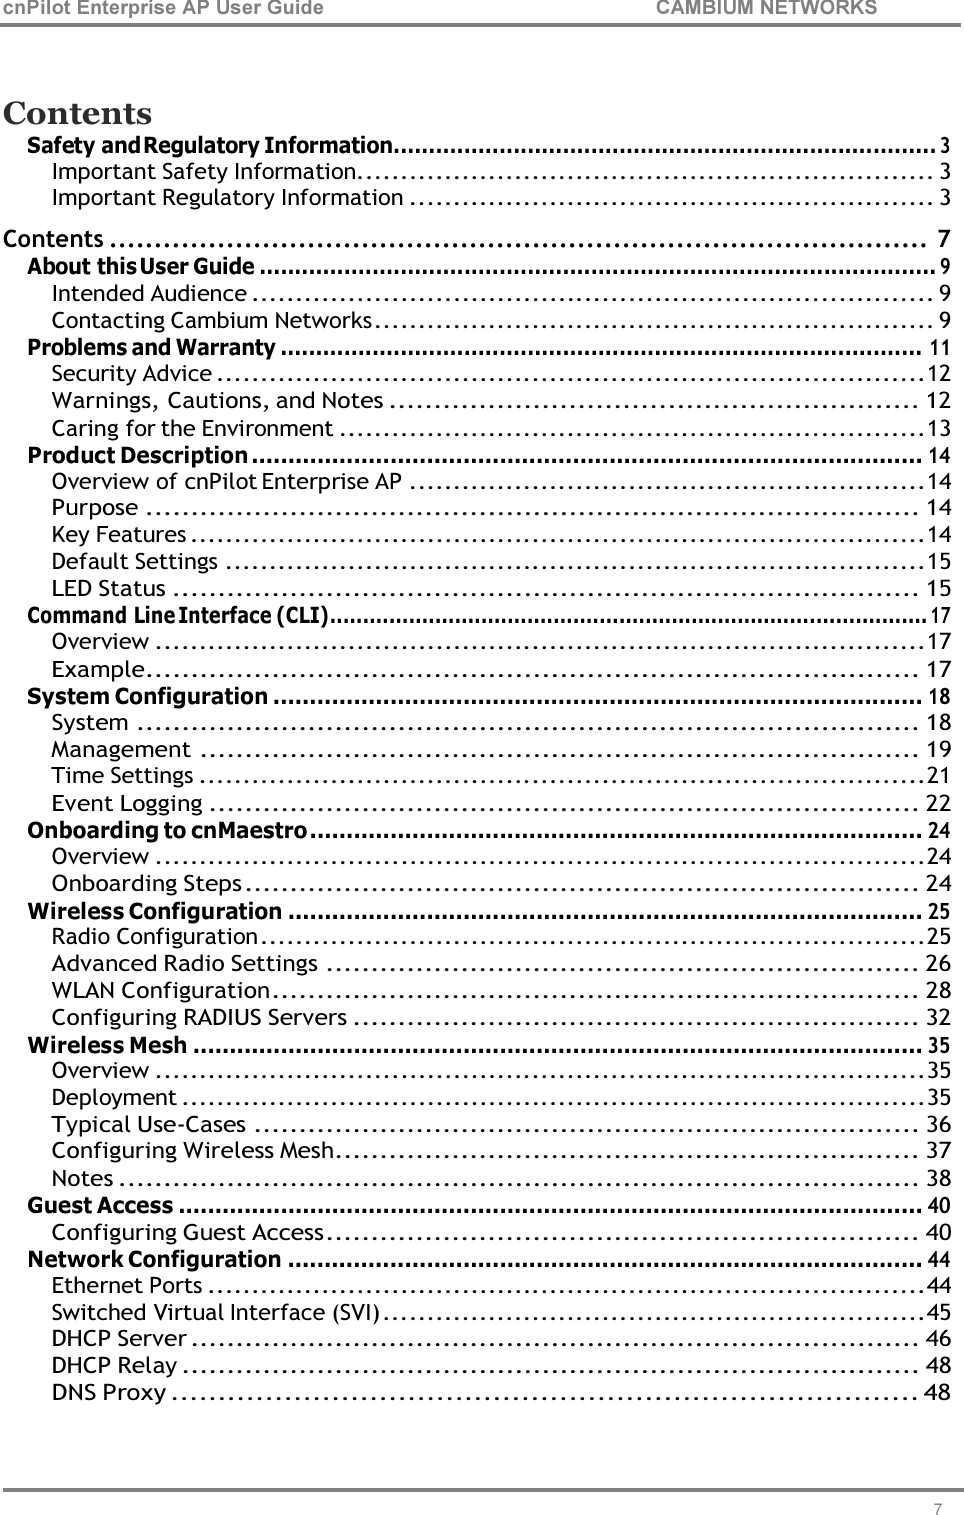 cnPilot Enterprise AP User Guide CAMBIUM NETWORKS 7     Contents Safety and Regulatory Information ............................................................................. 3 Important Safety Information.................................................................. 3 Important Regulatory Information ............................................................ 3 Contents ........................................................................................... 7 About this User Guide ................................................................................................ 9 Intended Audience .............................................................................. 9 Contacting Cambium Networks ................................................................ 9 Problems and Warranty ........................................................................................... 11 Security Advice ................................................................................. 12 Warnings, Cautions, and Notes ........................................................... 12 Caring for the Environment ................................................................... 13 Product Description ............................................................................................ 14 Overview of cnPilot Enterprise AP ........................................................... 14 Purpose ...................................................................................... 14 Key Features .................................................................................... 14 Default Settings ................................................................................ 15 LED Status ................................................................................... 15 Command Line Interface (CLI) ........................................................................................... 17 Overview ........................................................................................ 17 Example ...................................................................................... 17 System Configuration ......................................................................................... 18 System ....................................................................................... 18 Management ................................................................................ 19 Time Settings ................................................................................... 21 Event Logging ............................................................................... 22 Onboarding to cnMaestro .................................................................................... 24 Overview ........................................................................................ 24 Onboarding Steps ........................................................................... 24 Wireless Configuration ....................................................................................... 25 Radio Configuration ............................................................................ 25 Advanced Radio Settings .................................................................. 26 WLAN Configuration ........................................................................ 28 Configuring RADIUS Servers ............................................................... 32 Wireless Mesh .................................................................................................... 35 Overview ........................................................................................ 35 Deployment ..................................................................................... 35 Typical Use-Cases .......................................................................... 36 Configuring Wireless Mesh................................................................. 37 Notes ......................................................................................... 38 Guest Access ...................................................................................................... 40 Configuring Guest Access .................................................................. 40 Network Configuration ....................................................................................... 44 Ethernet Ports .................................................................................. 44 Switched Virtual Interface (SVI) .............................................................. 45 DHCP Server ................................................................................. 46 DHCP Relay .................................................................................. 48 DNS Proxy ............................................................................... 48 